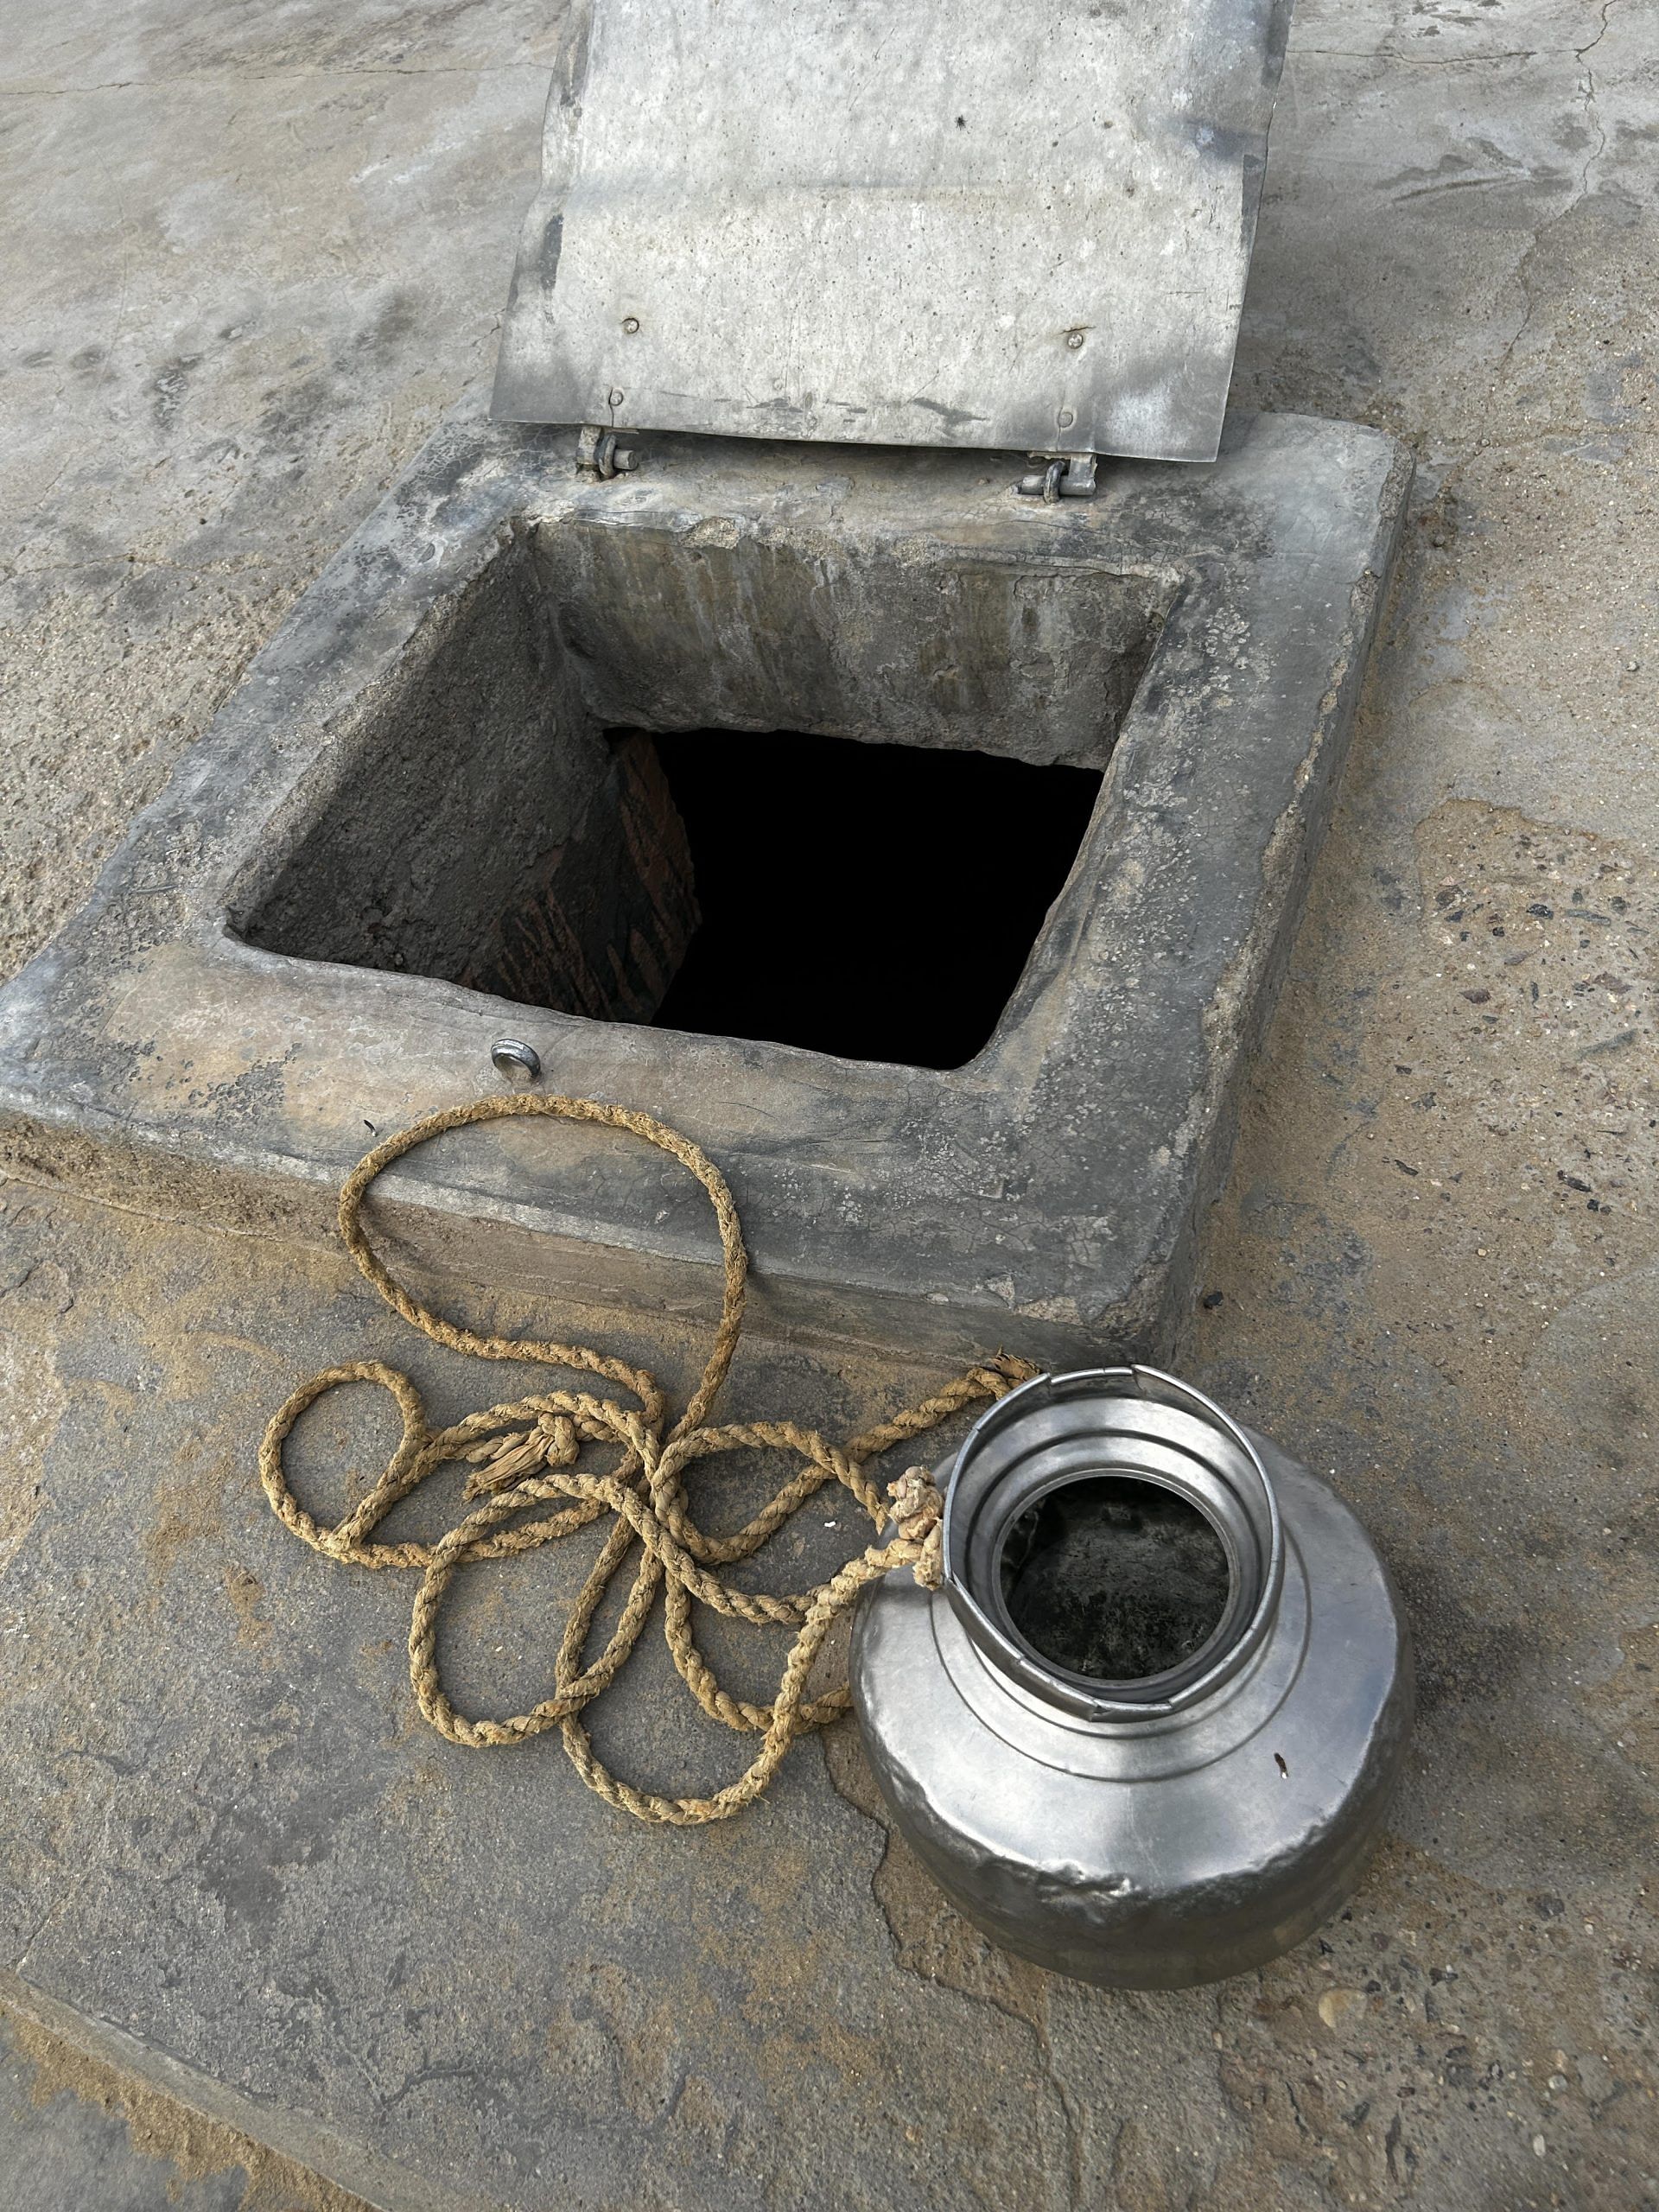 Most wells are now sealed with concrete, except for a small opening that allows families to fetch water. | Jyoti Yadav | ThePrint